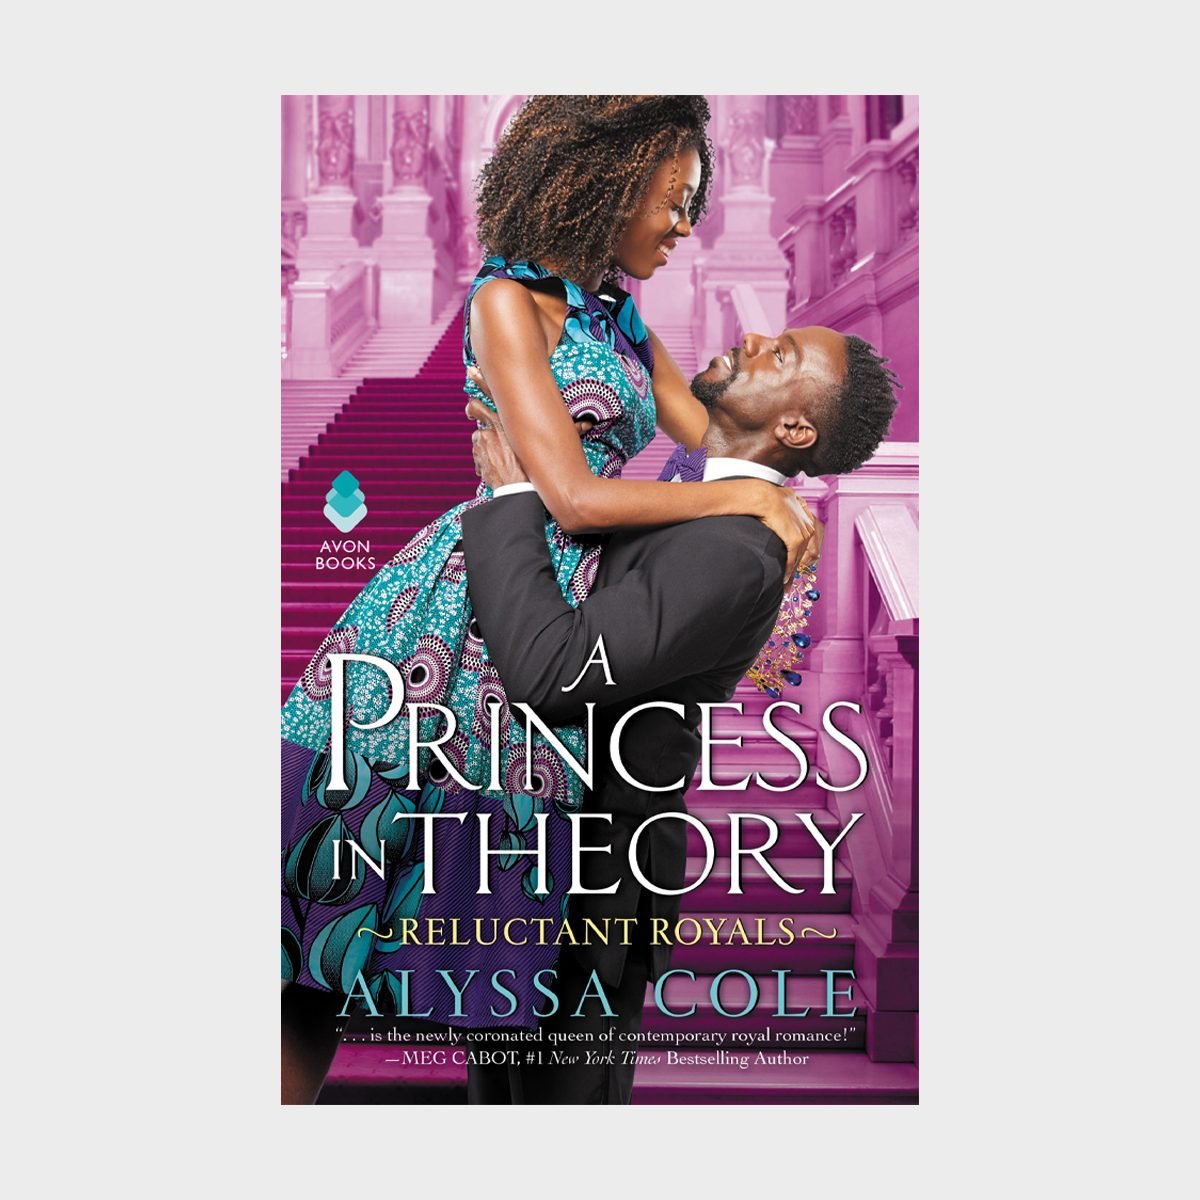 <p class=""><strong>Series starter: </strong><a href="https://www.amazon.com/Princess-Theory-Reluctant-Royals/dp/0062685546/" rel="noopener noreferrer"><em>A Princess in Theory</em></a></p> <p class=""><strong>What you're in for: </strong>Mistaken identity and a ton of royal charm</p> <p>Alyssa Cole's <em>Reluctant Royals</em> romance book series begins with <em>A Princess in Theory</em>. First published in 2018, the book introduces readers to Naledi Smith, a grad student who has received a slew of emails claiming she's an African princess. Yeah, right! She may have grown up in foster care, but she isn't buying into that scam. Prince Thabiso sets out to find his true betrothed, and when Naledi mistakes the heir to the Thesolo throne as a commoner, Thabiso can't resist dipping into a reality that lies outside his royal responsibilities. But what happens when the truth is revealed?</p> <p class="listicle-page__cta-button-shop"><a class="shop-btn" href="https://www.amazon.com/Princess-Theory-Reluctant-Royals/dp/0062685546/">Shop Now</a></p>